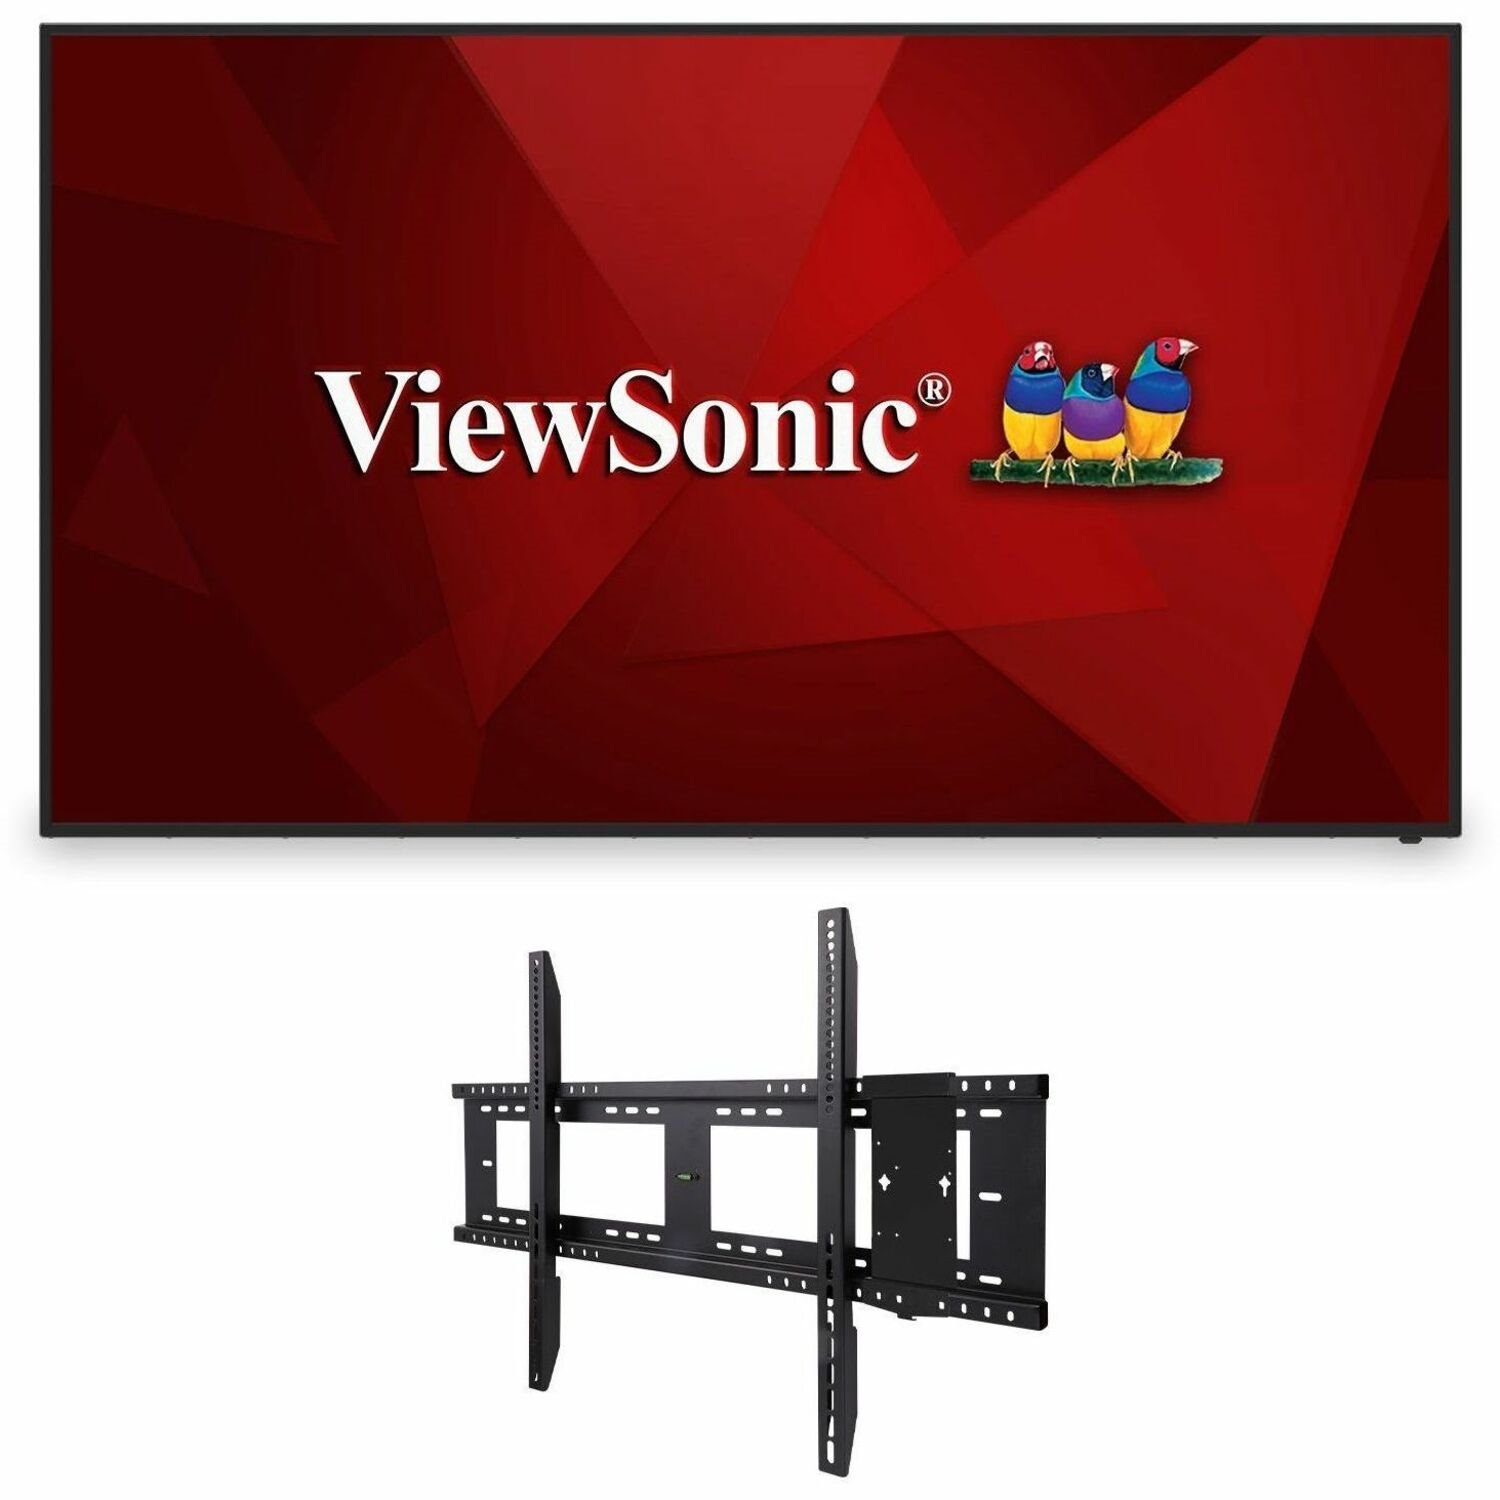 ViewSonic Commercial Display CDE7512-E1 - 4K, 16/7 Operation, Integrated Software and Fixed Wall Mount - 330 cd/m2 - 75"